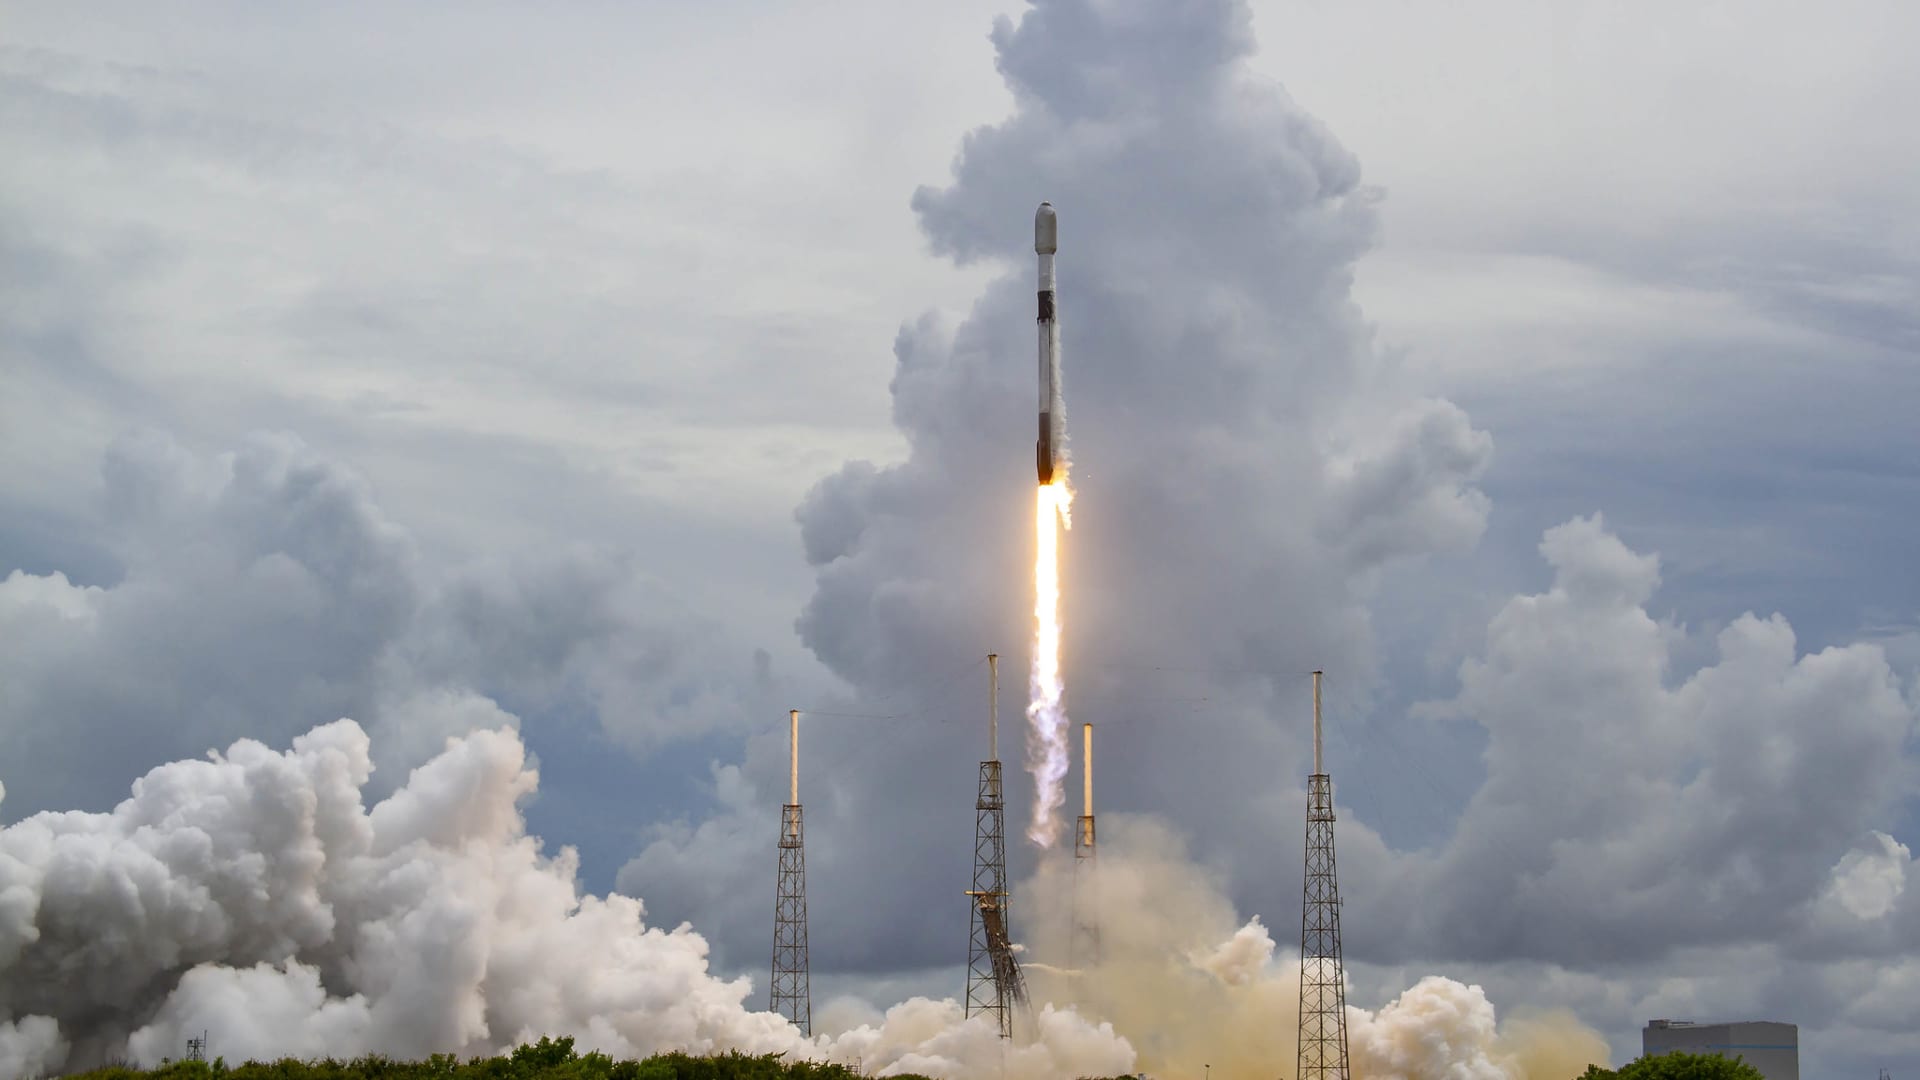 SpaceX raises prices for rocket launches and Starlink satellite internet as inflation hits raw materials